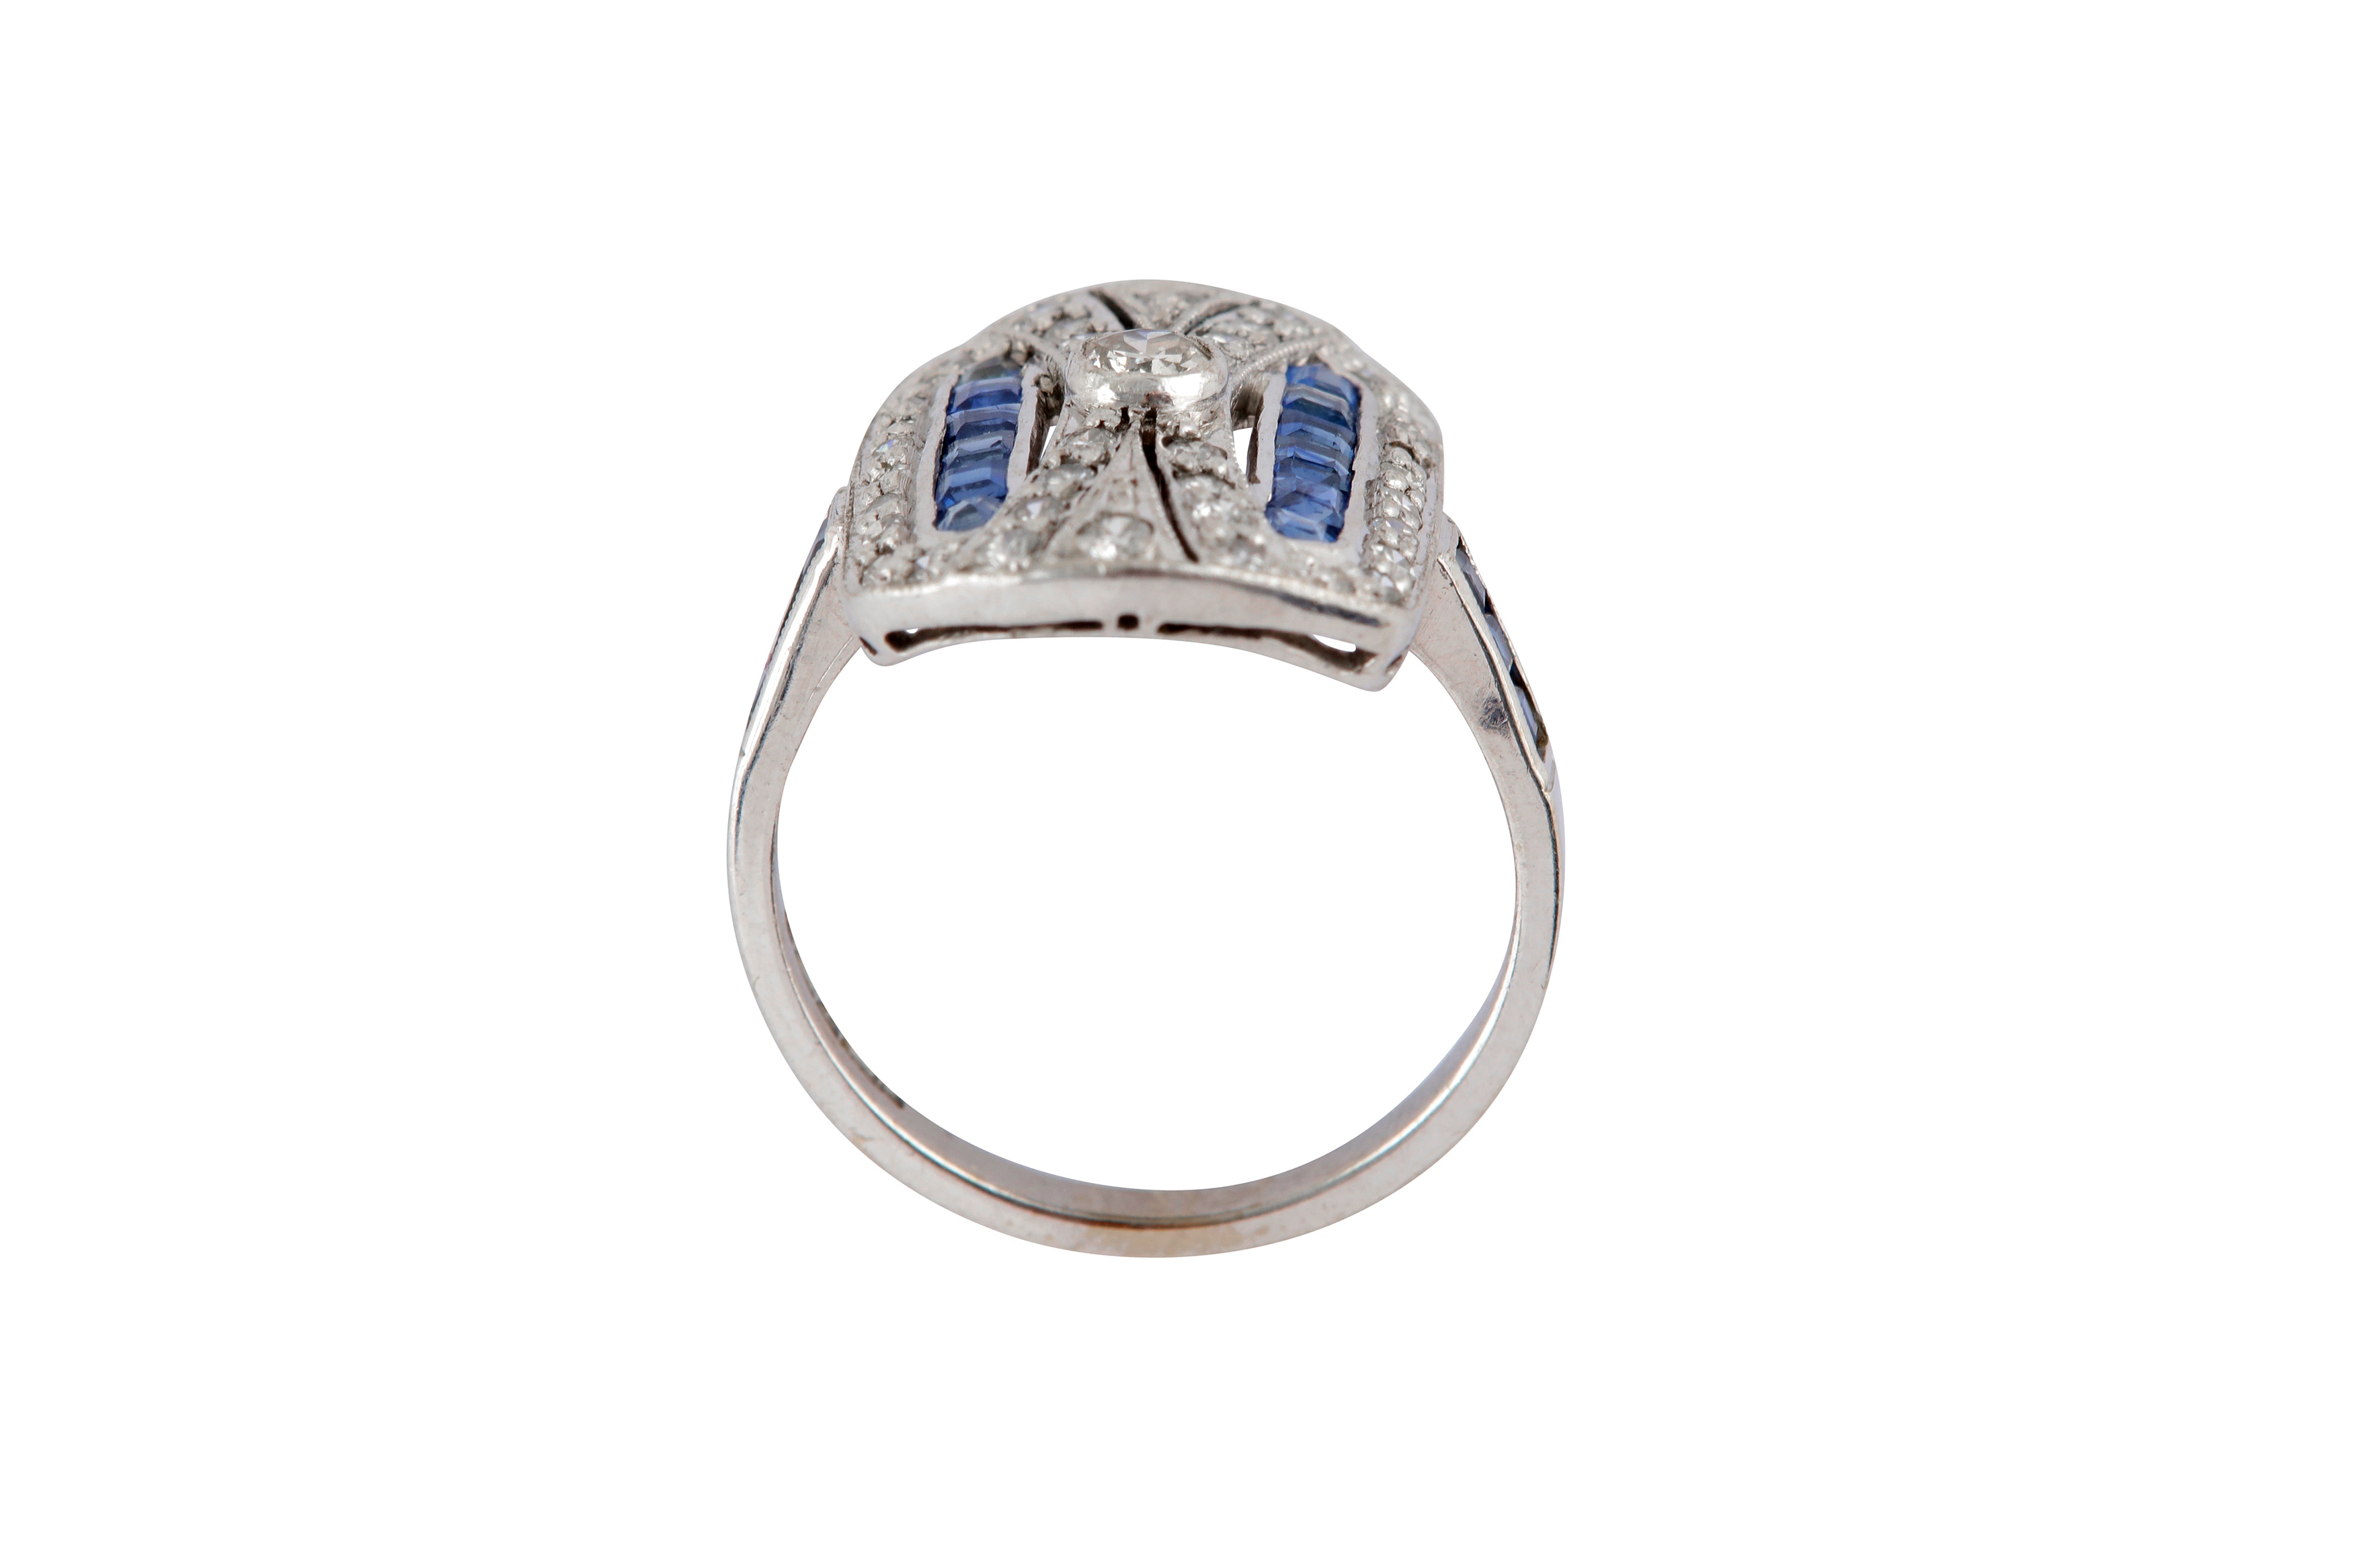 A SAPPHIRE AND DIAMOND GEOMETRIC RING - Image 4 of 4